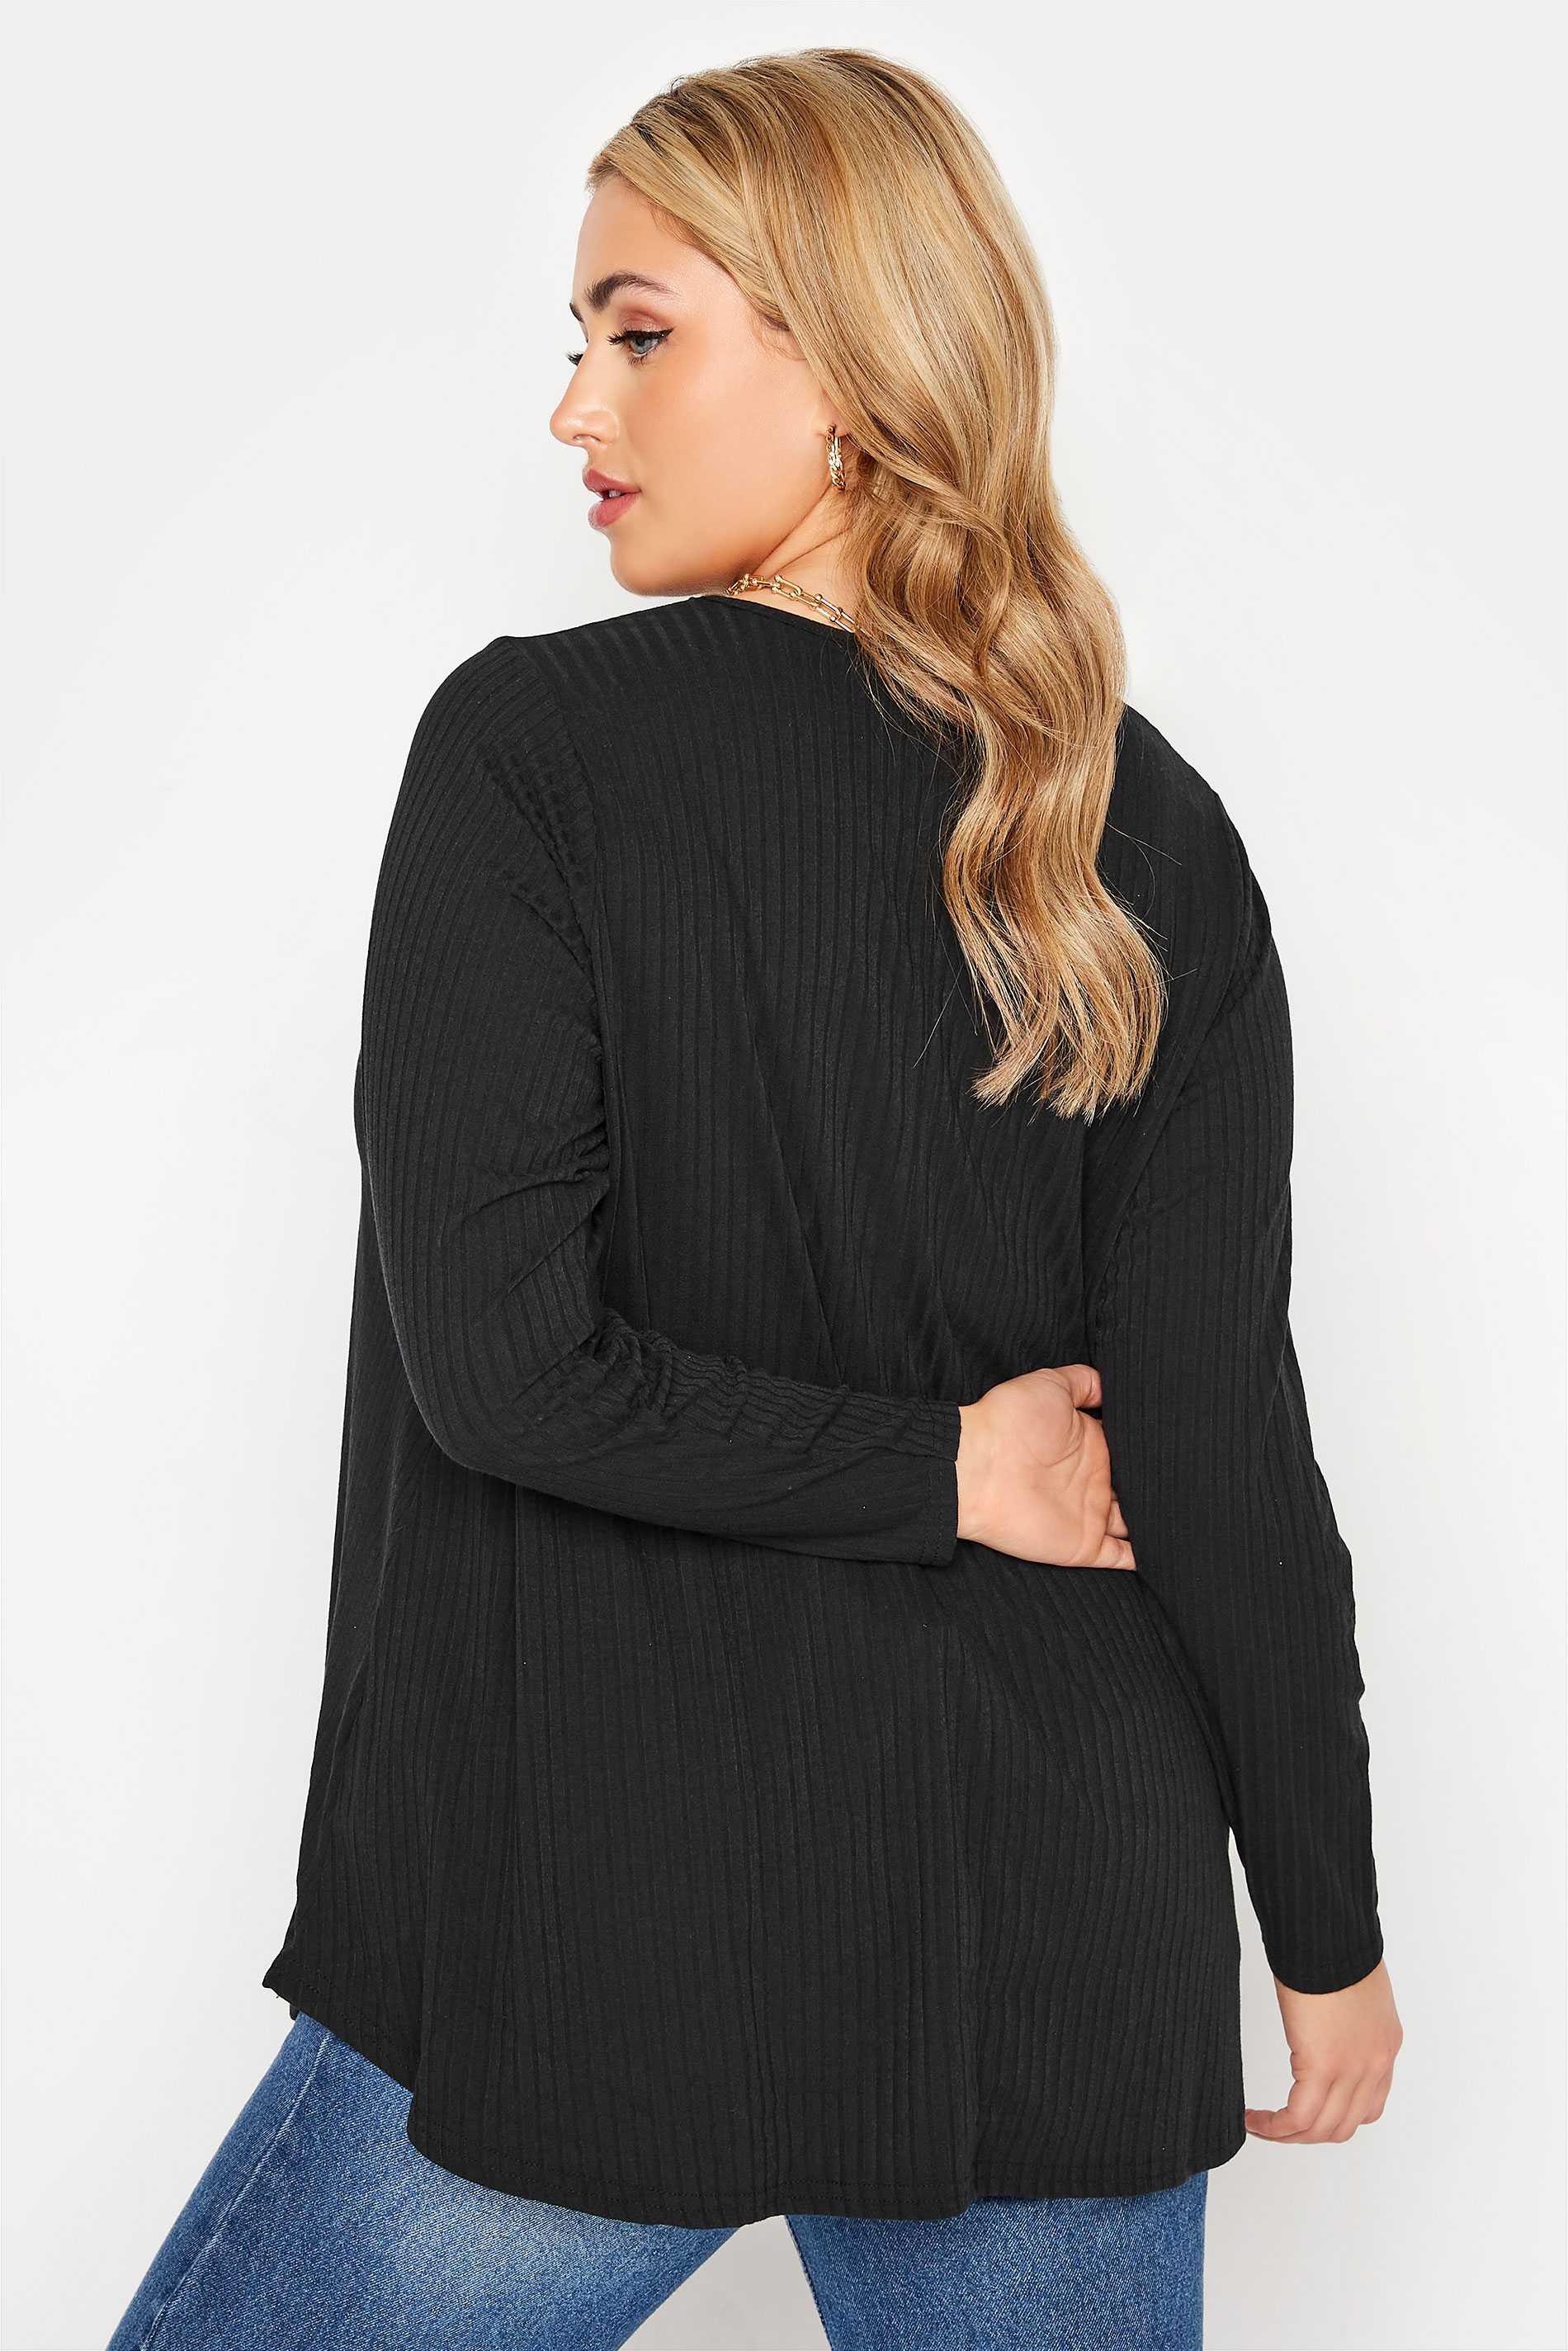 Grande taille  Tops Grande taille  Tops Jersey | LIMITED COLLECTION - Top Noir Nervuré Manches Longues - HO15684